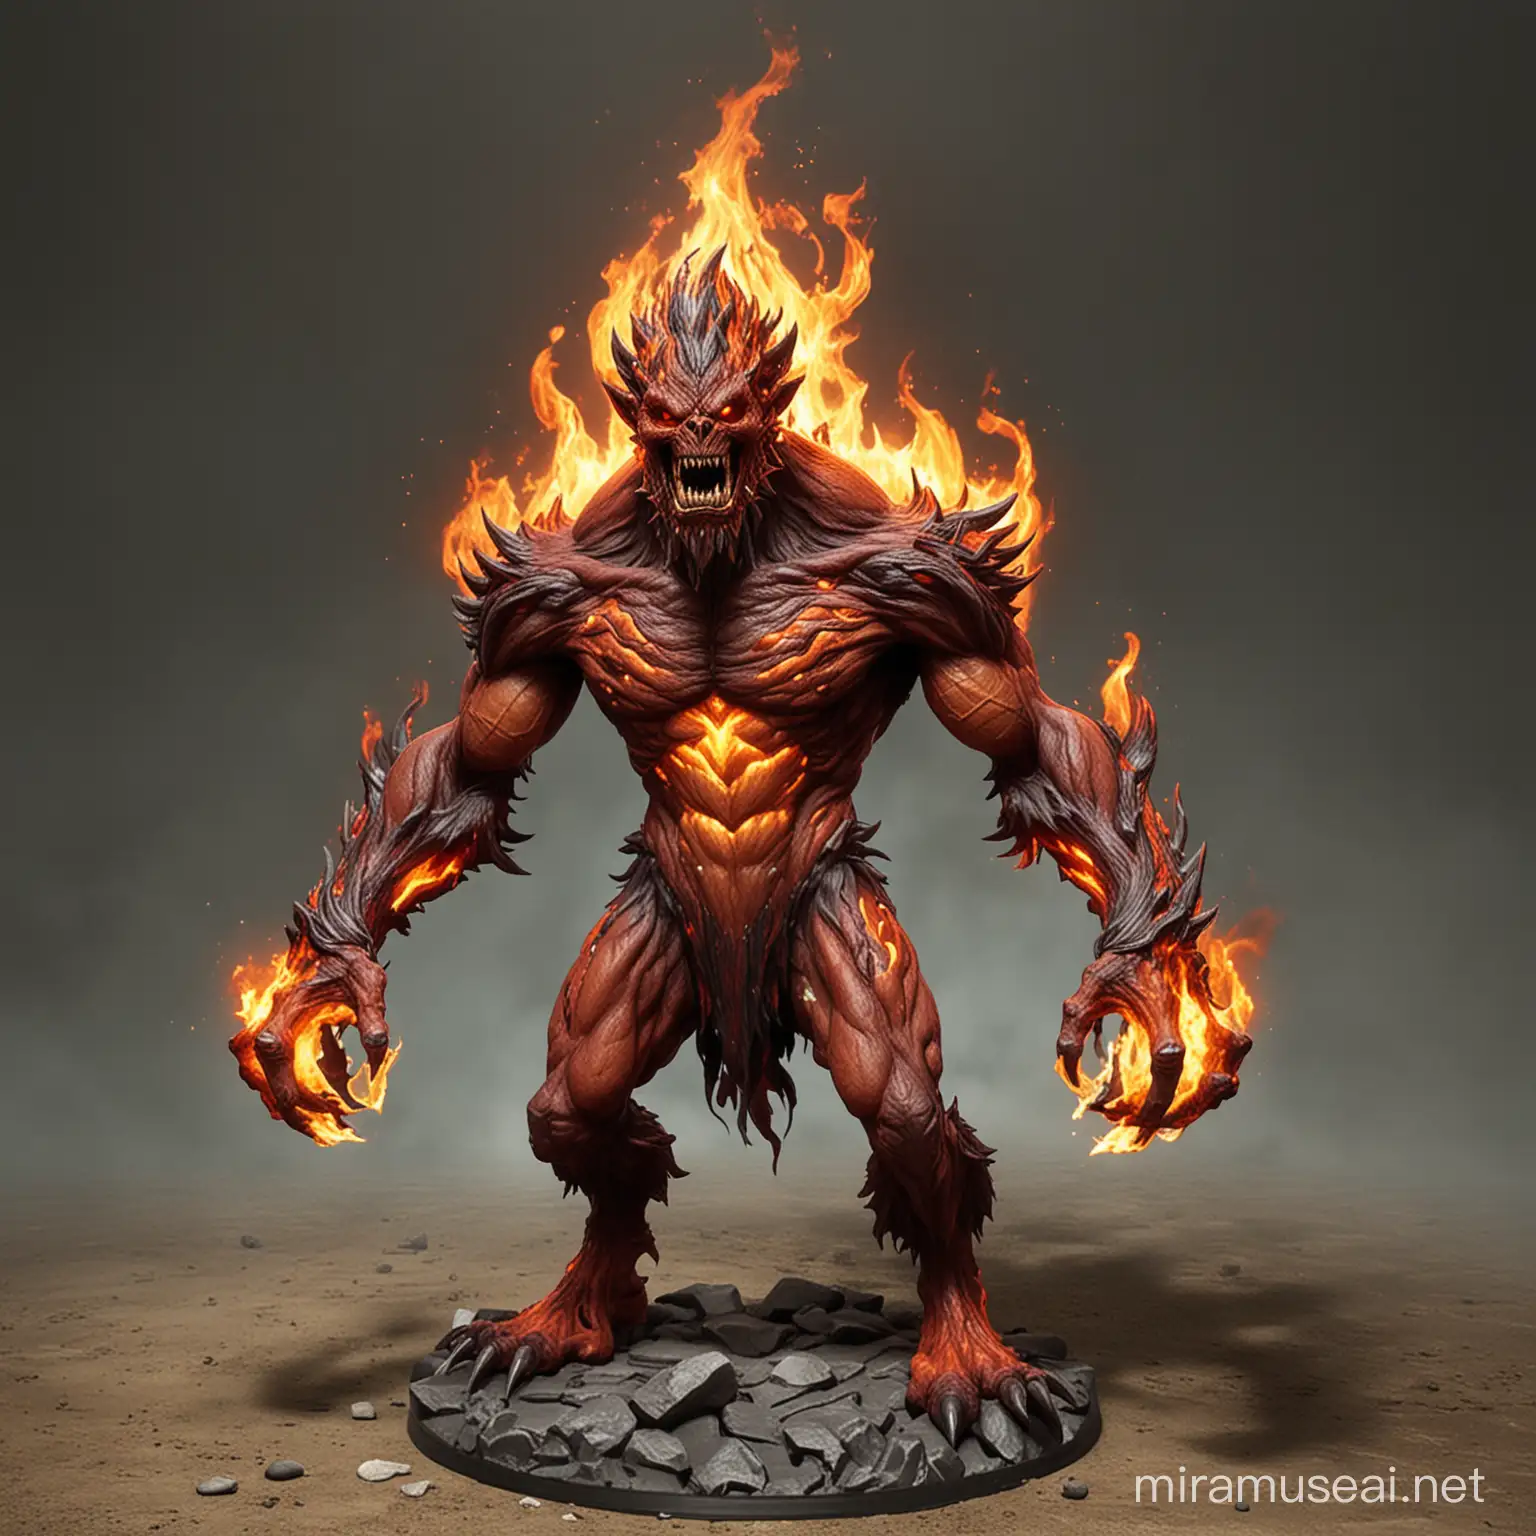 Fiery Encounter with a Vicious Fire Elemental Imp